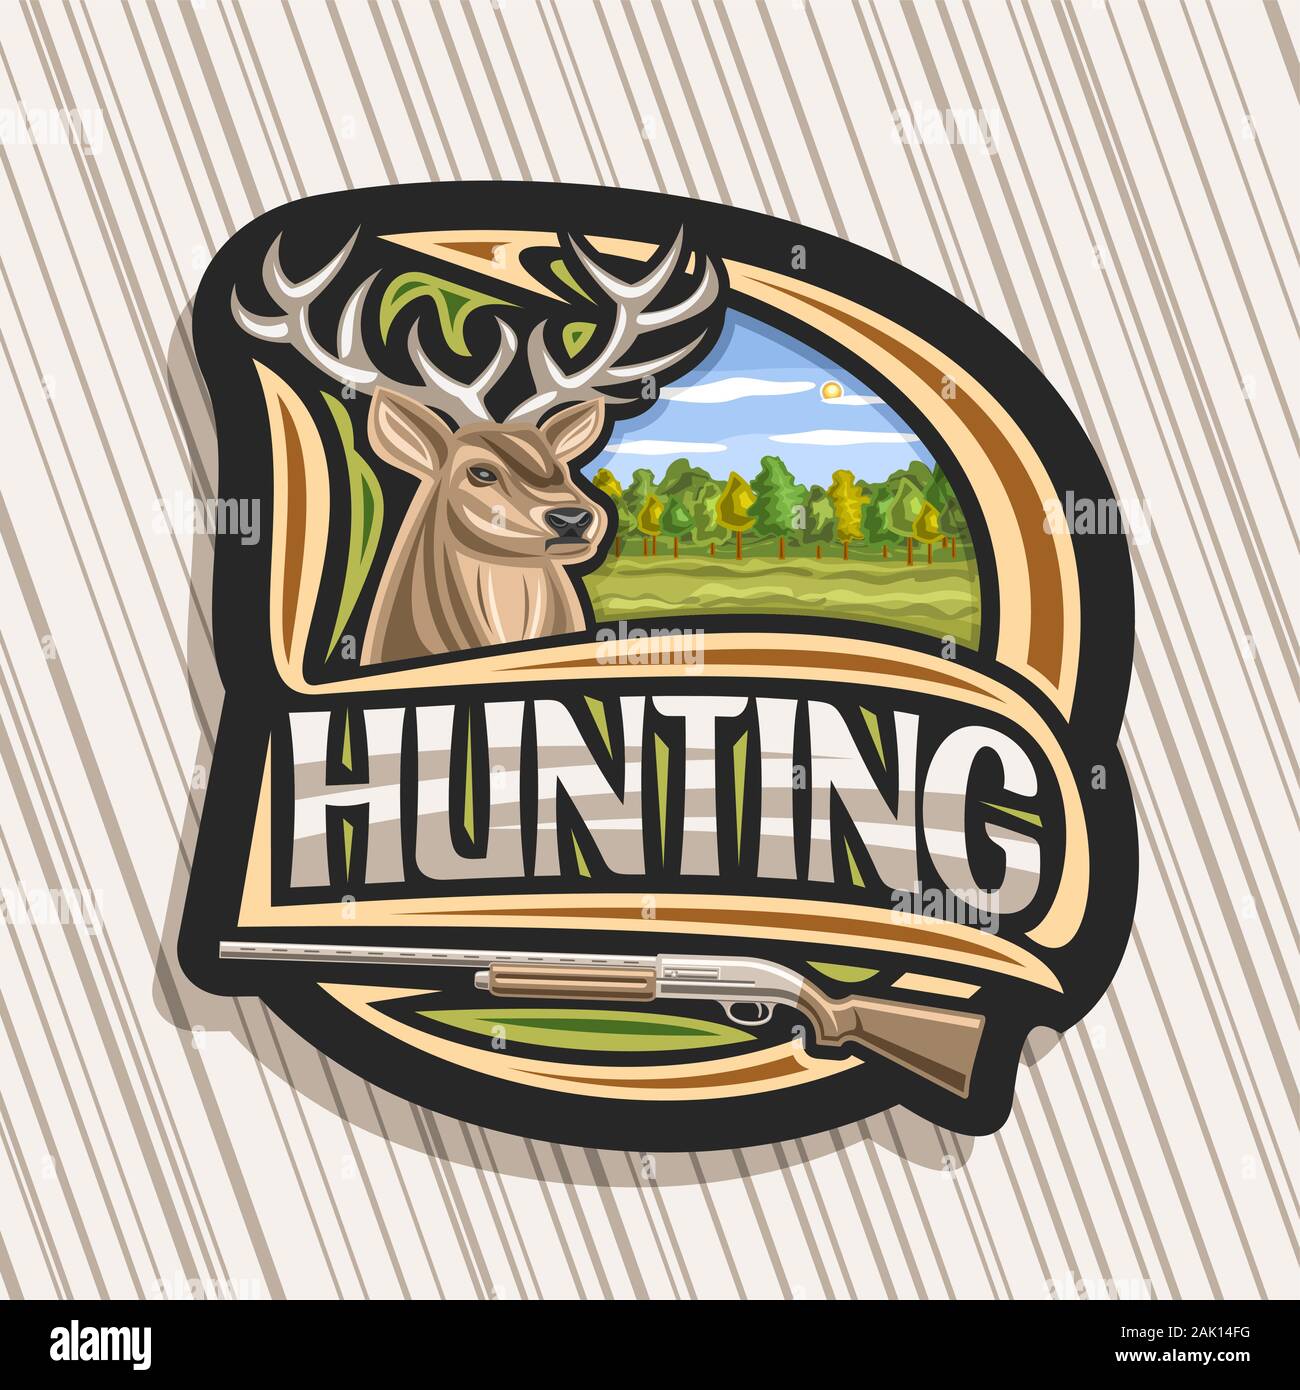 Vector logo for Hunting, black decorative sticker with illustration of white-tailed deer head on trees background, original lettering for word hunting Stock Vector